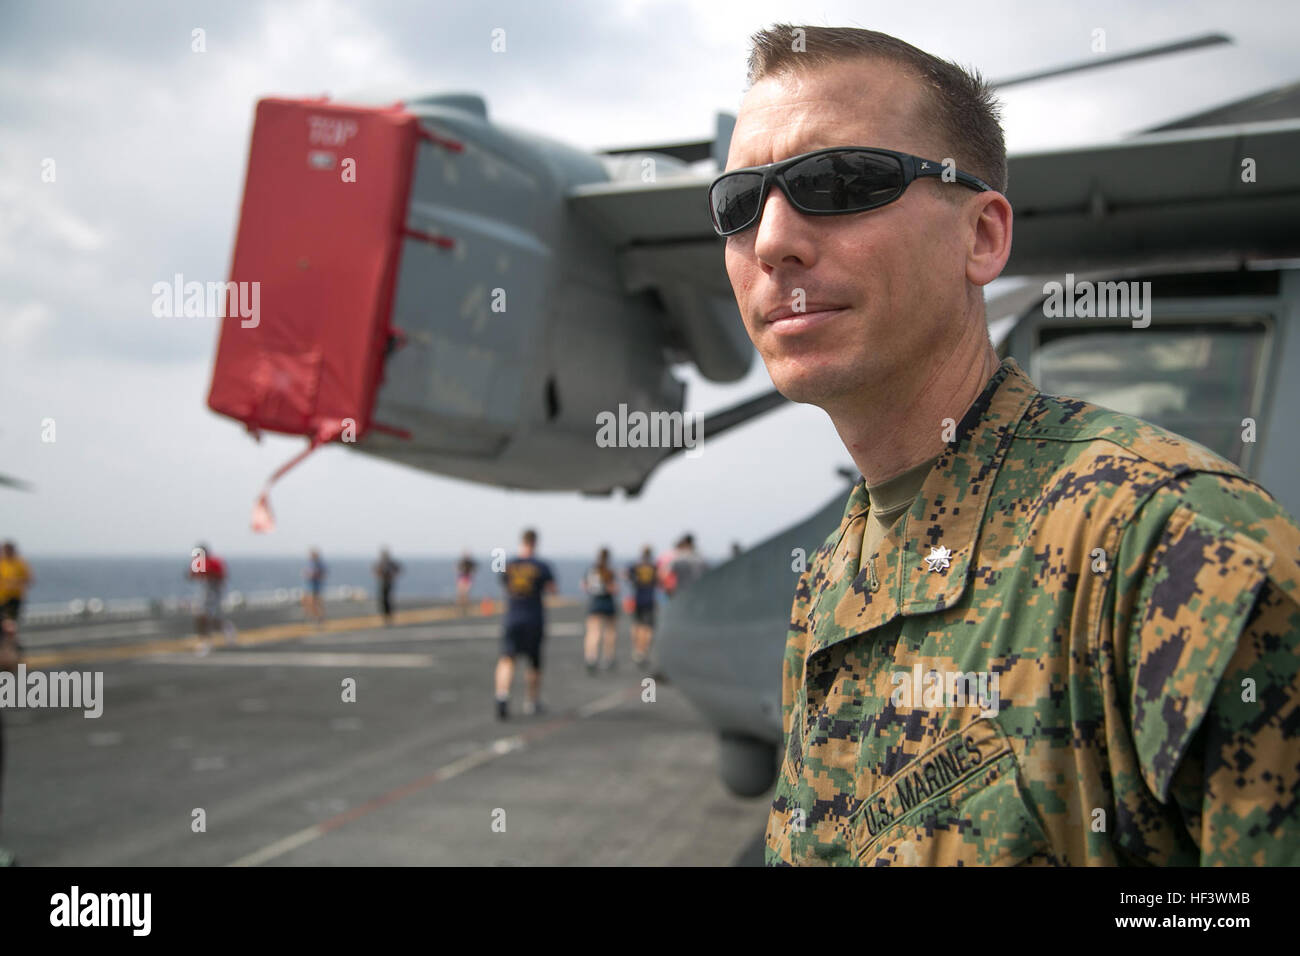 At sea. (March 27, 2016)-U.S. Marine Lt. Col. Terence Connelly, Commanding Officer, Combat Logistics Battalion 13, 13th Marine Expeditionary Unit; cheers on participants in a 5k run for women's history month, March 27, 2016, during the MEU's western pacific deployment aboard the USS Boxer. More then 4,500 Marines and Sailors from the Boxer ARG, 13th MEU team are currently transiting the Pacific Ocean toward the U.S. 5th fleet area of operations during a scheduled deployment. (U.S. Marine Corps photo by Sgt. Briauna Birl/RELEASED) Women's History 5k aboard USS Boxer 160327-M-KR317-195 Stock Photo